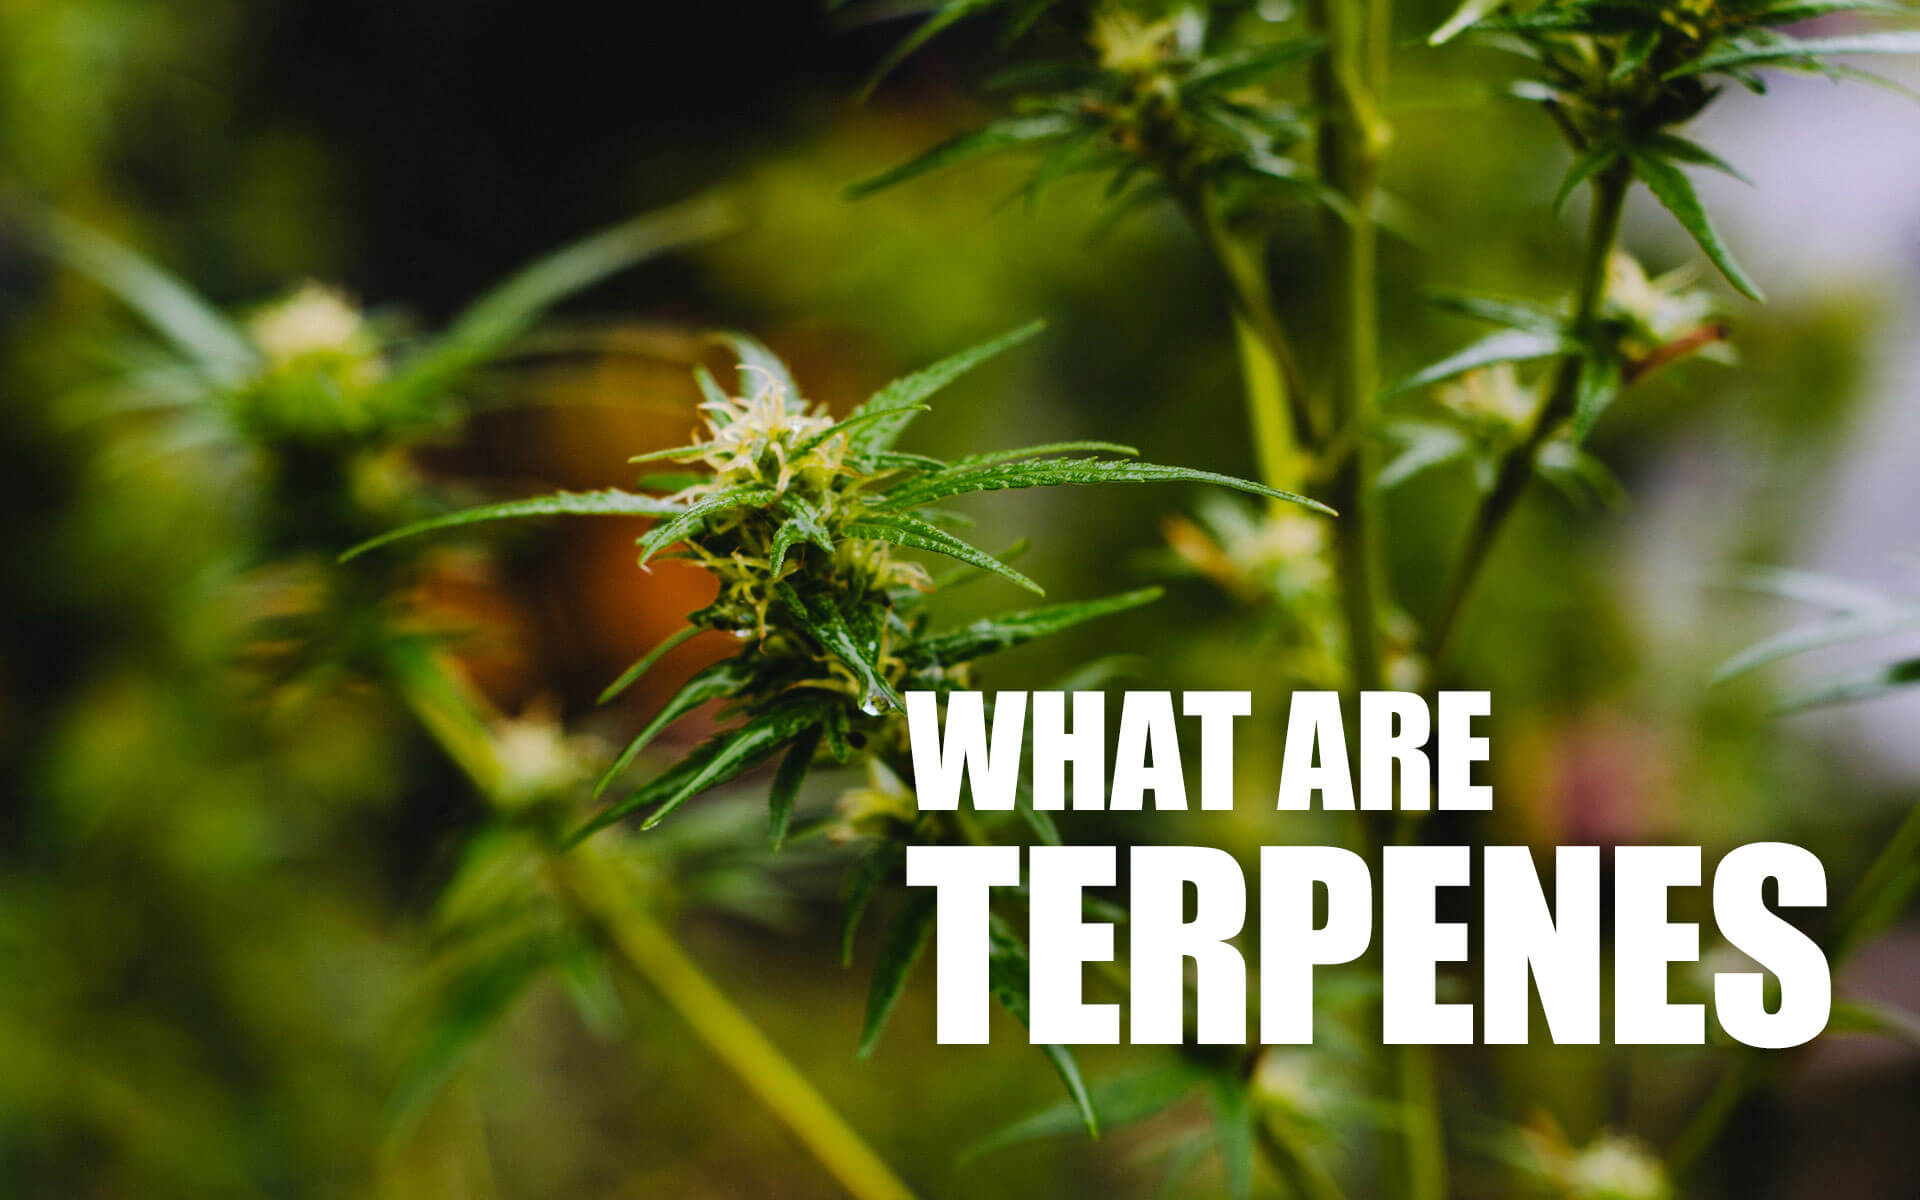 What are terpenes? And how do they work in our bodies?